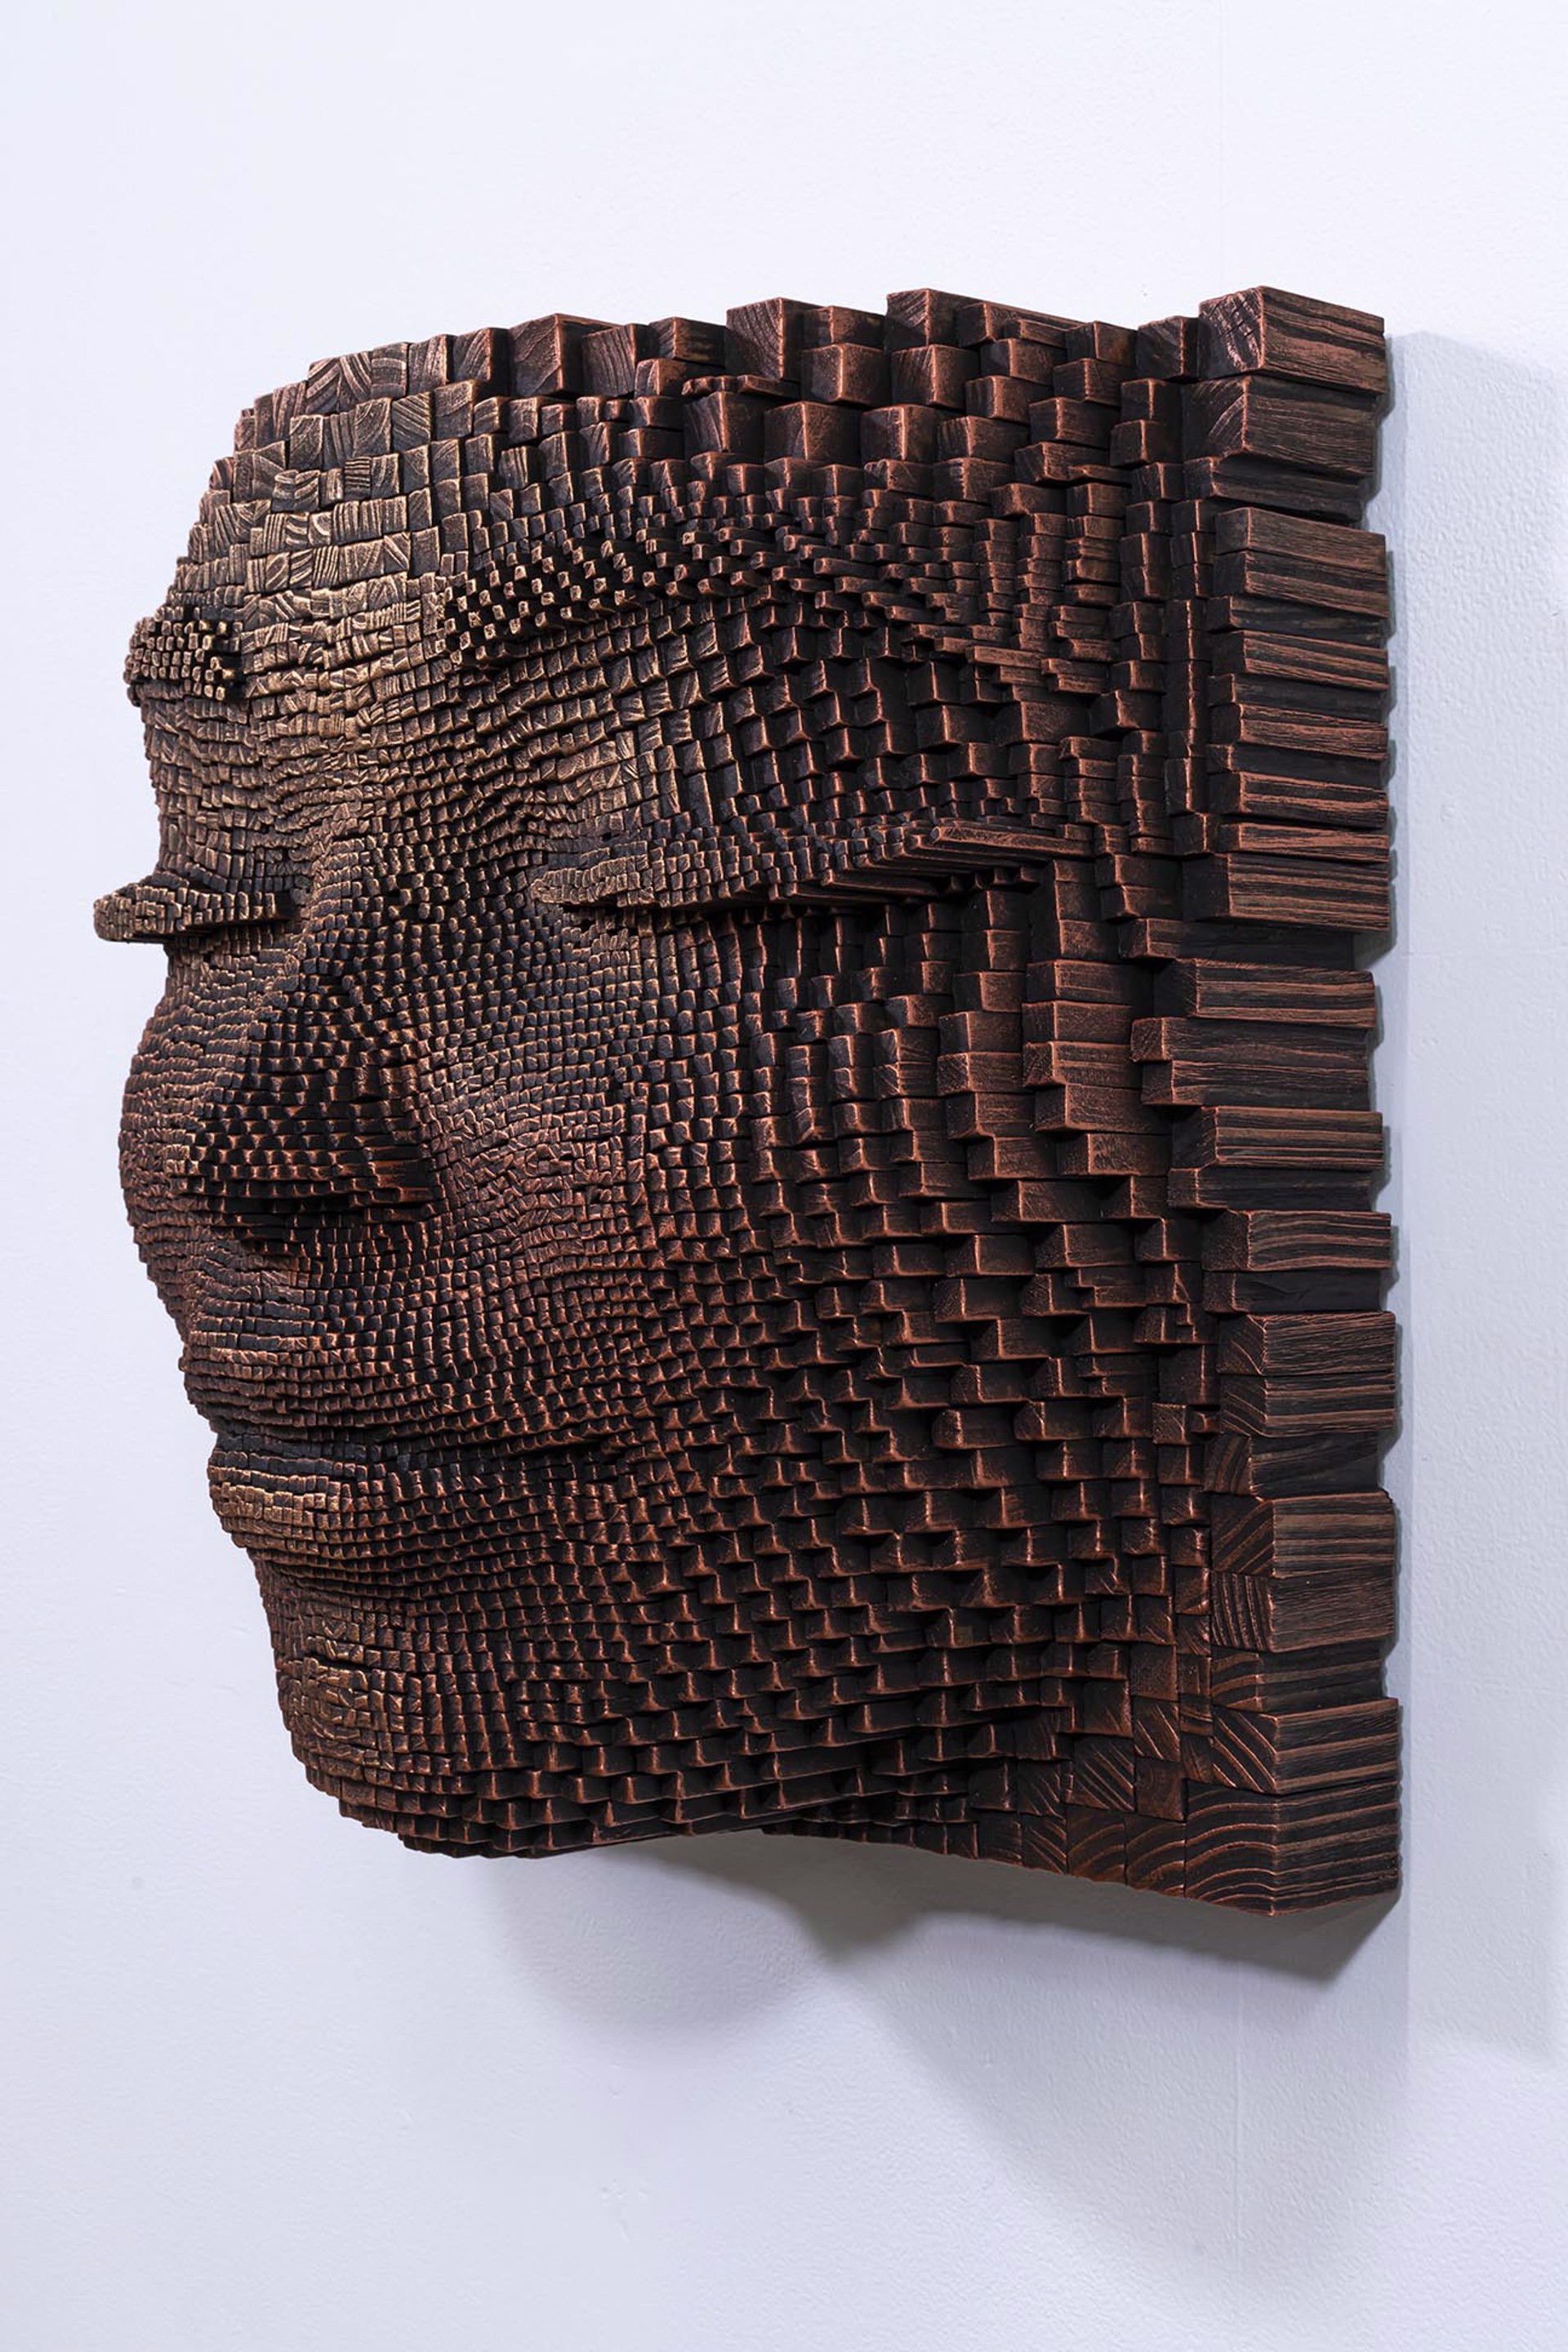 Mask #279 by Gil Bruvel